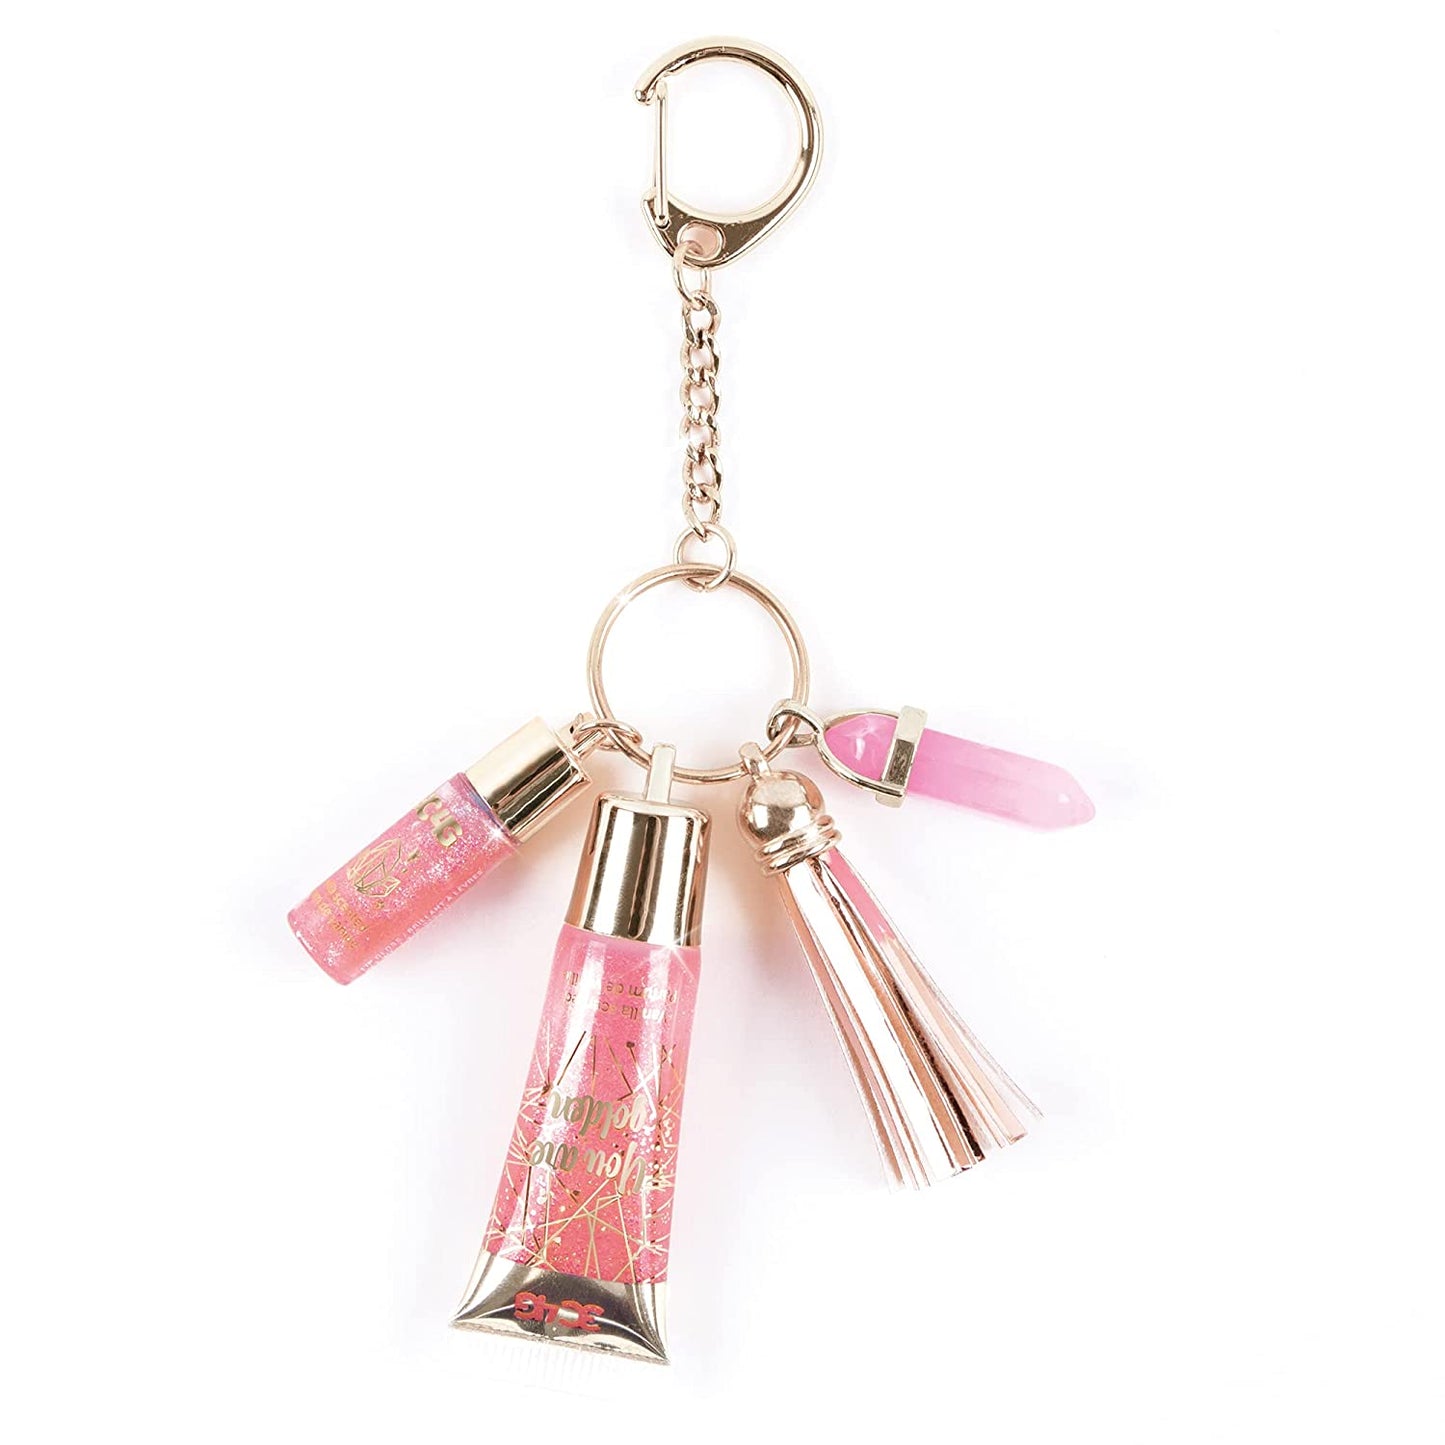 Three Cheers for Girls - Pink and Gold Keychain Lip Gloss - Lip Gloss Keychain for Girls with Two Pink Tinted, Vanilla Flavored Glosses